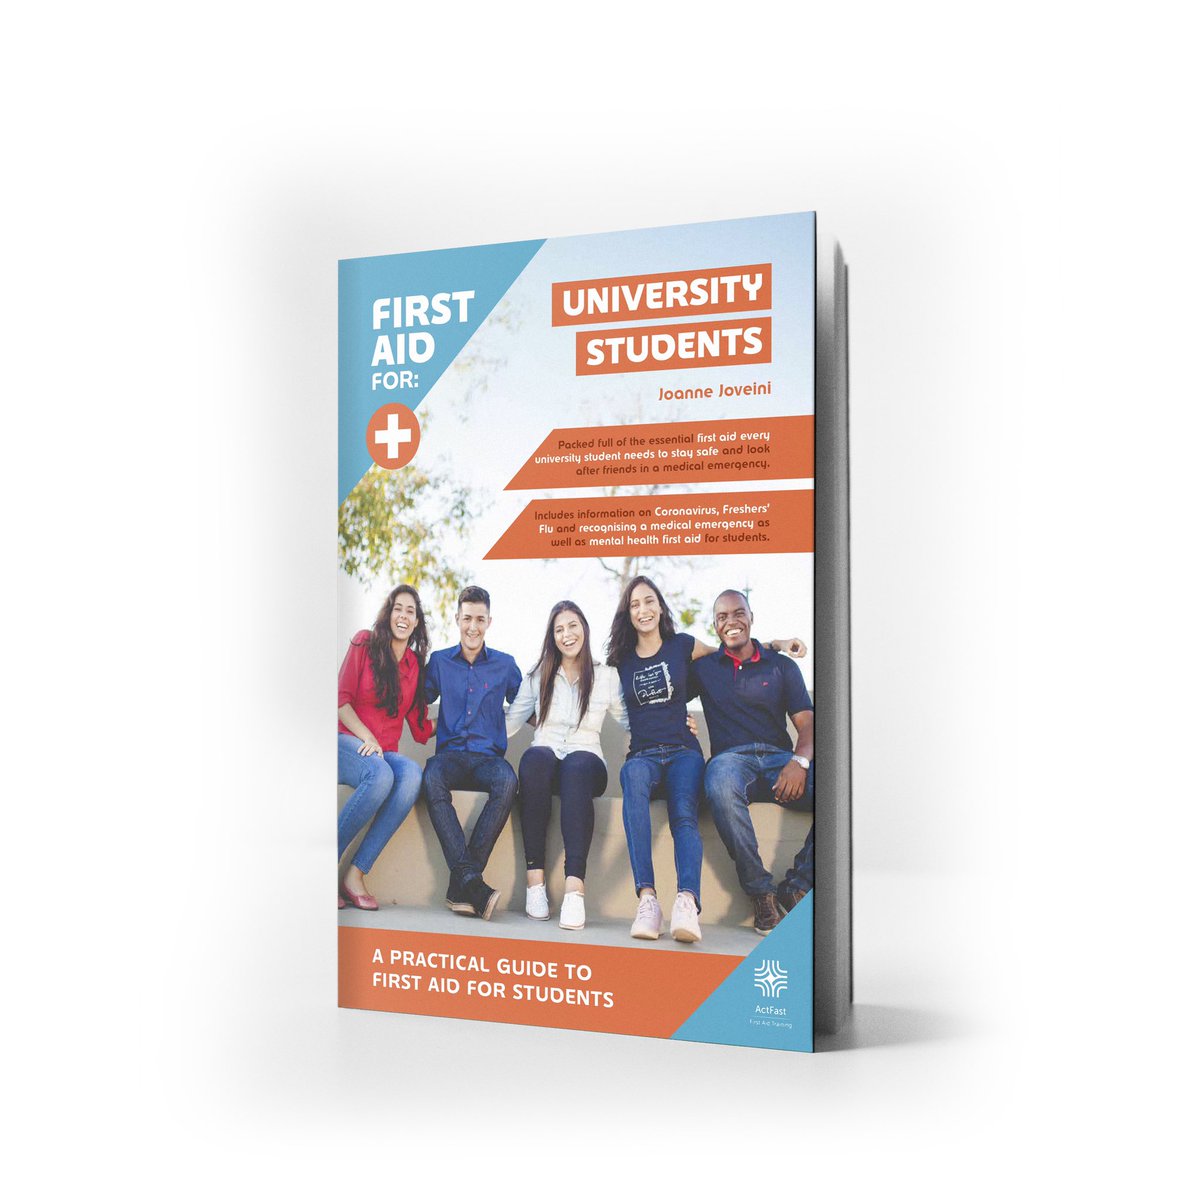 We can help #universities inform their #students on staying safe on campus and what to do in a #drinkspiking incident. 

Our ‘First Aid for University Students’ booklet provides all the essential first aid to help in a medical emergency. 

Contact me for more info. 

#university